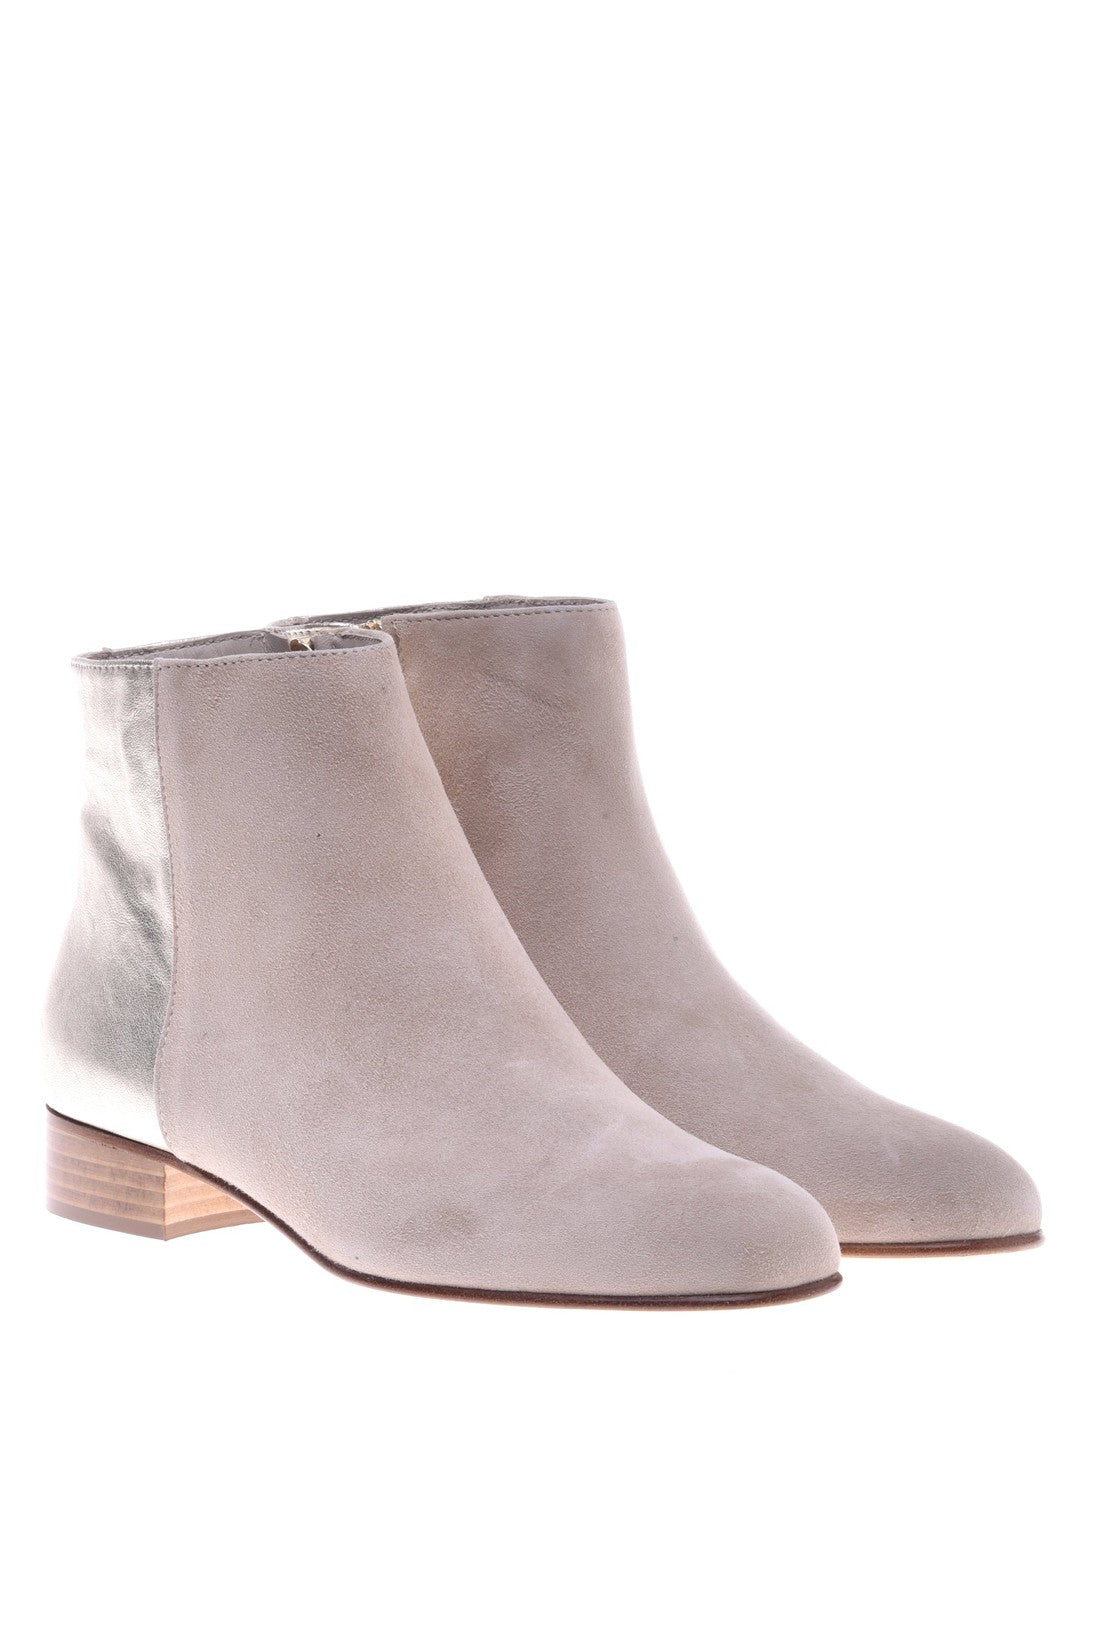 Ankle boot in taupe and platinum suede